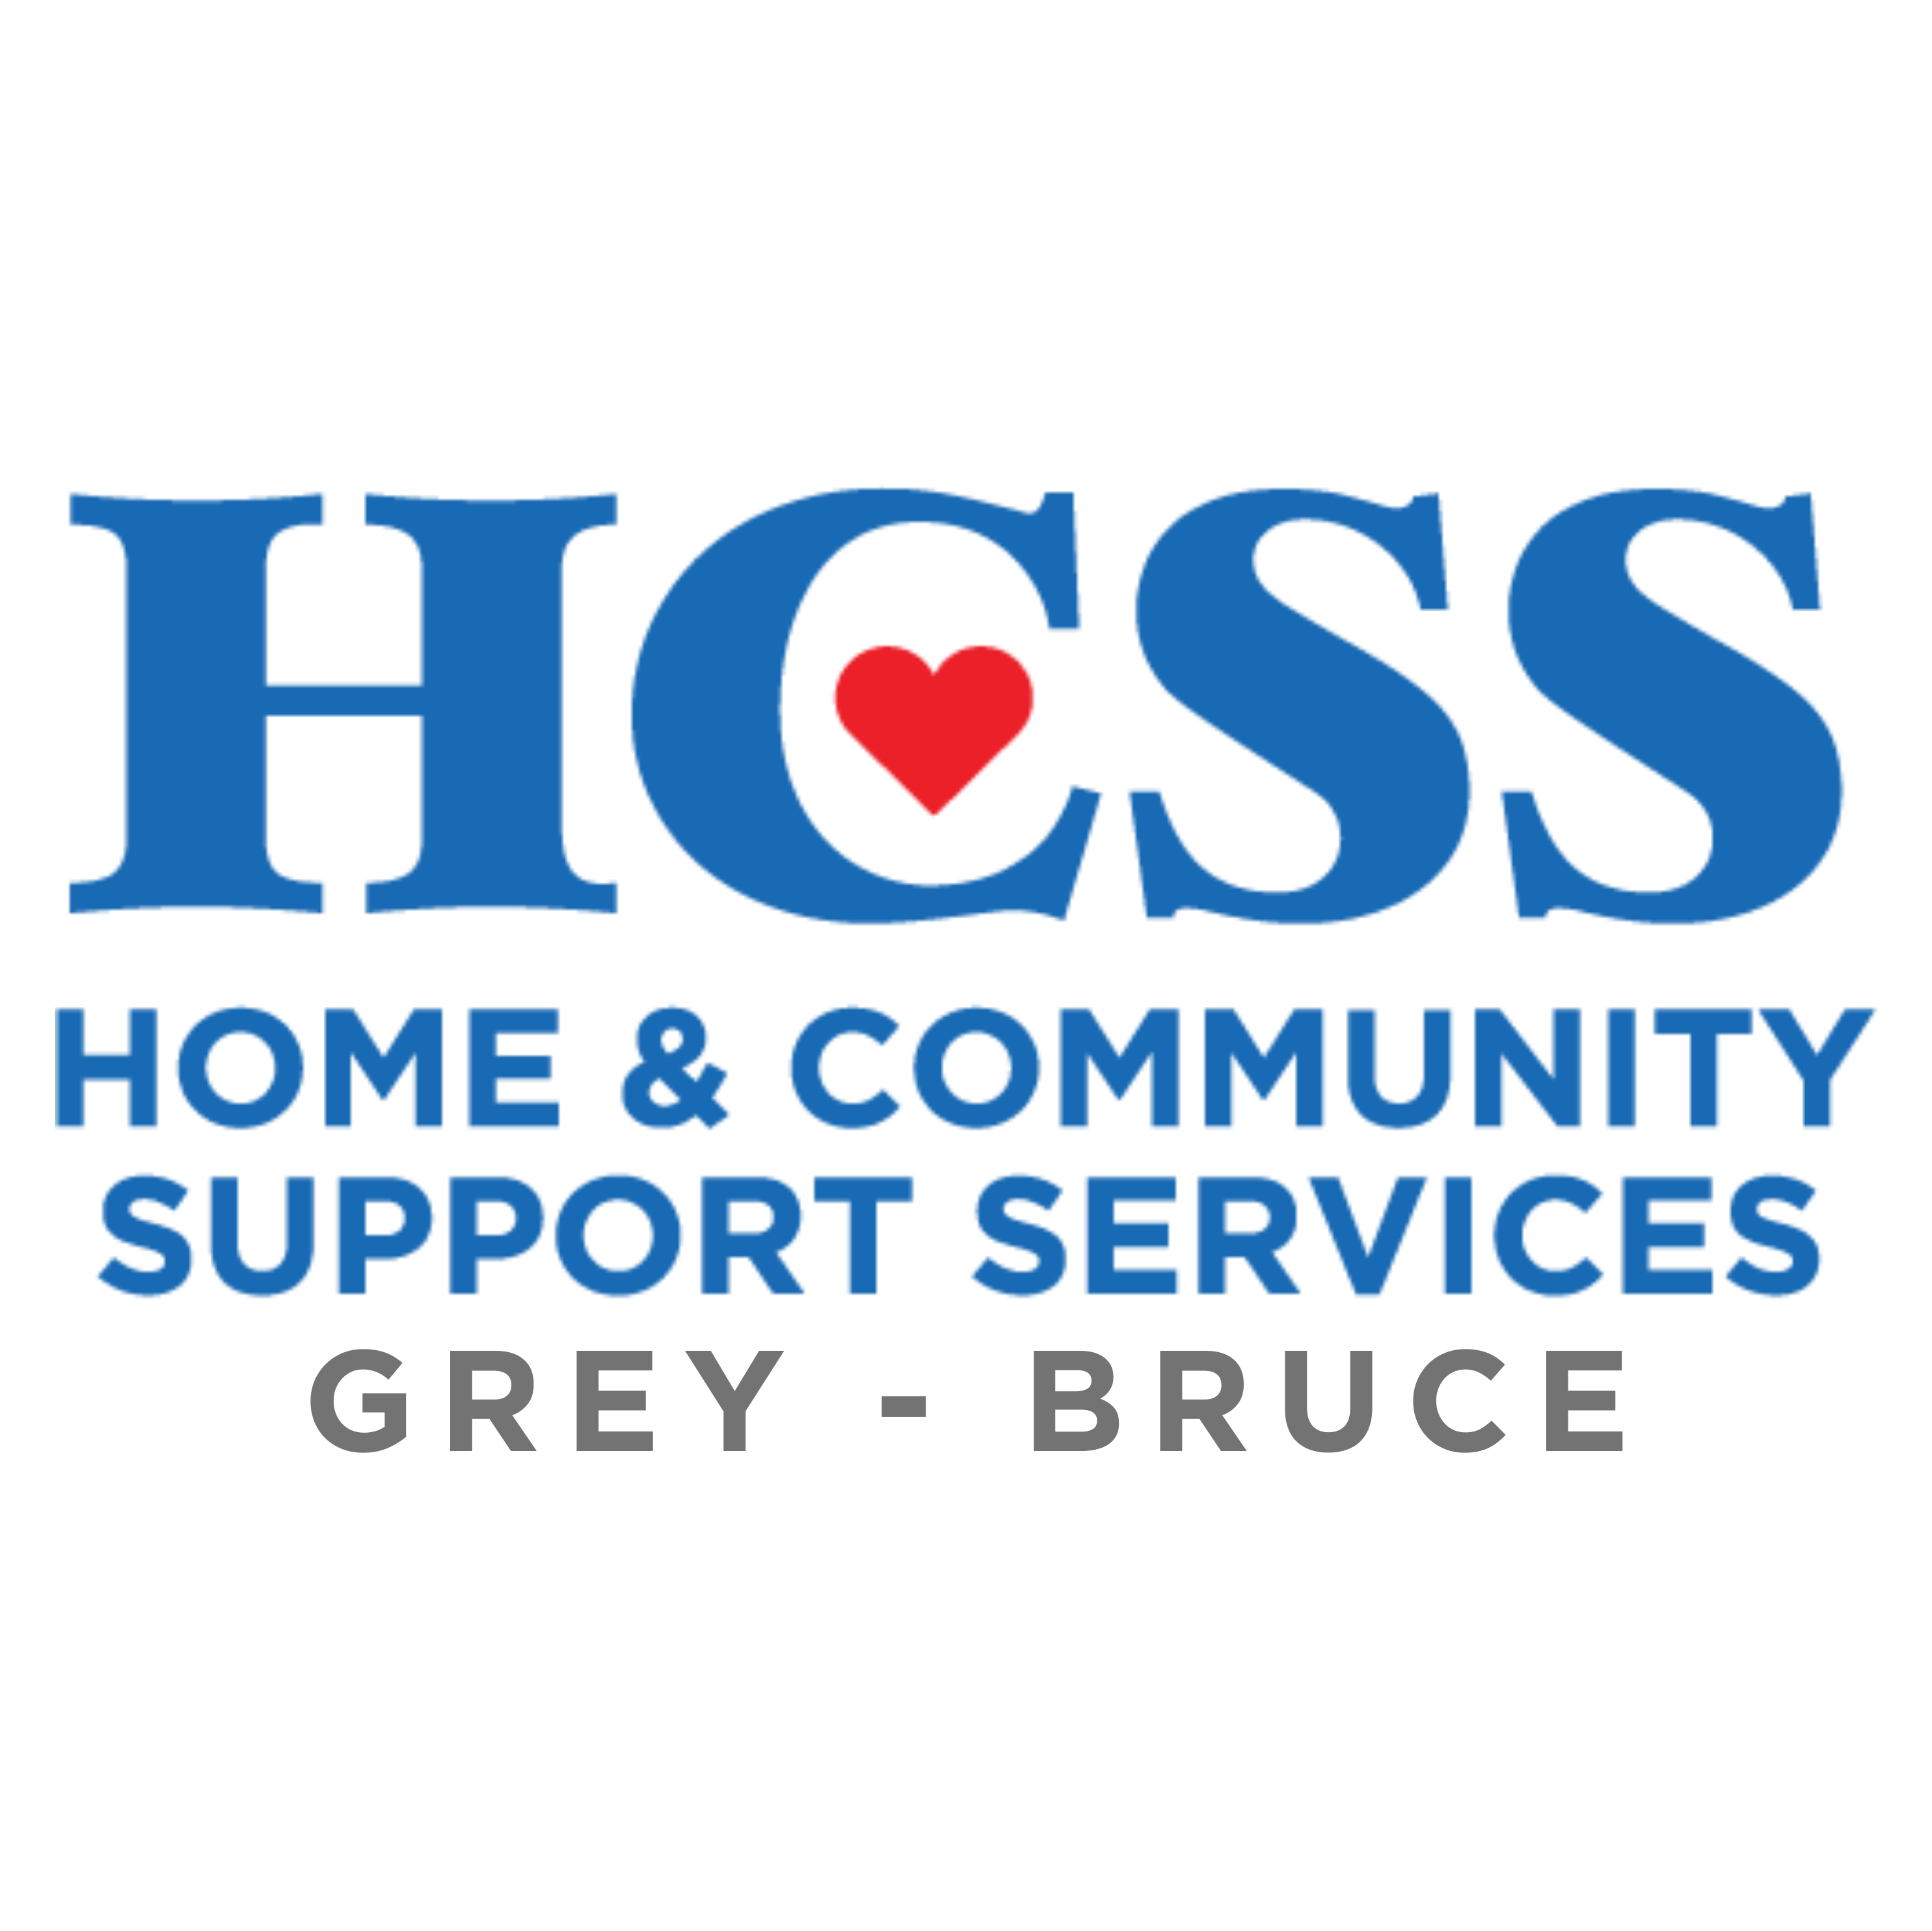 Home & Community Support Services Grey Bruce